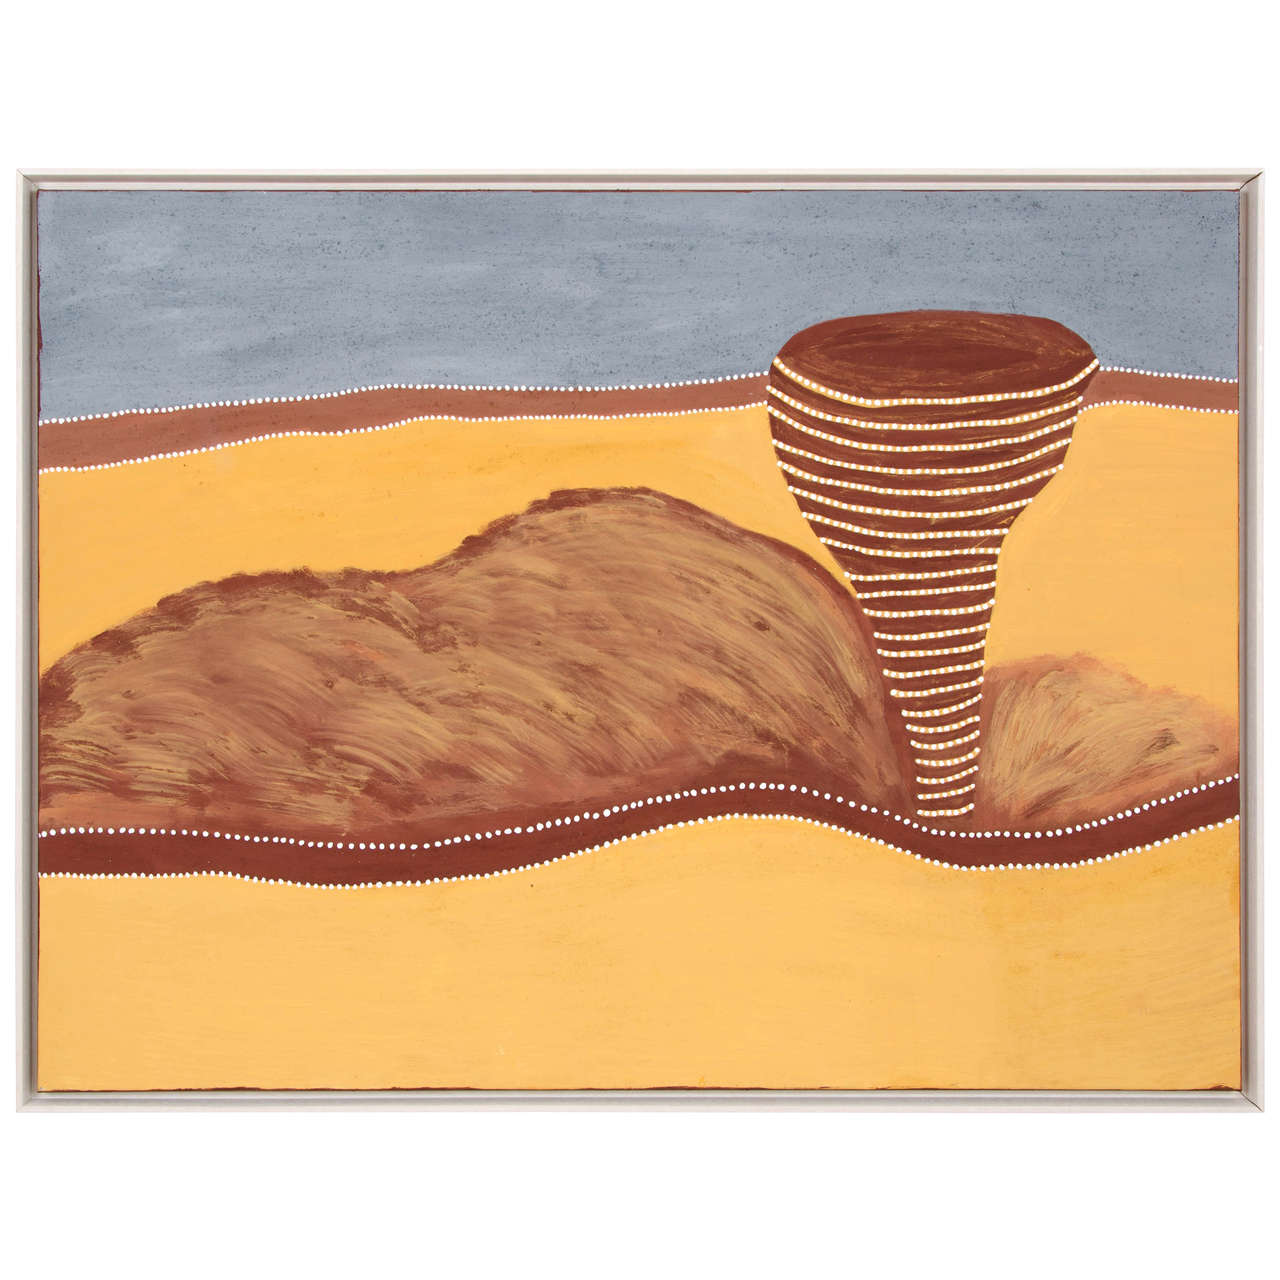 Myria Demouilpied - "Travelling Spirits" - natural ochre pigments on canvas.

Contemporary Australian aboriginal art.

This beautiful framed painting is executed in natural ochres which add an interesting texture to the surface. The